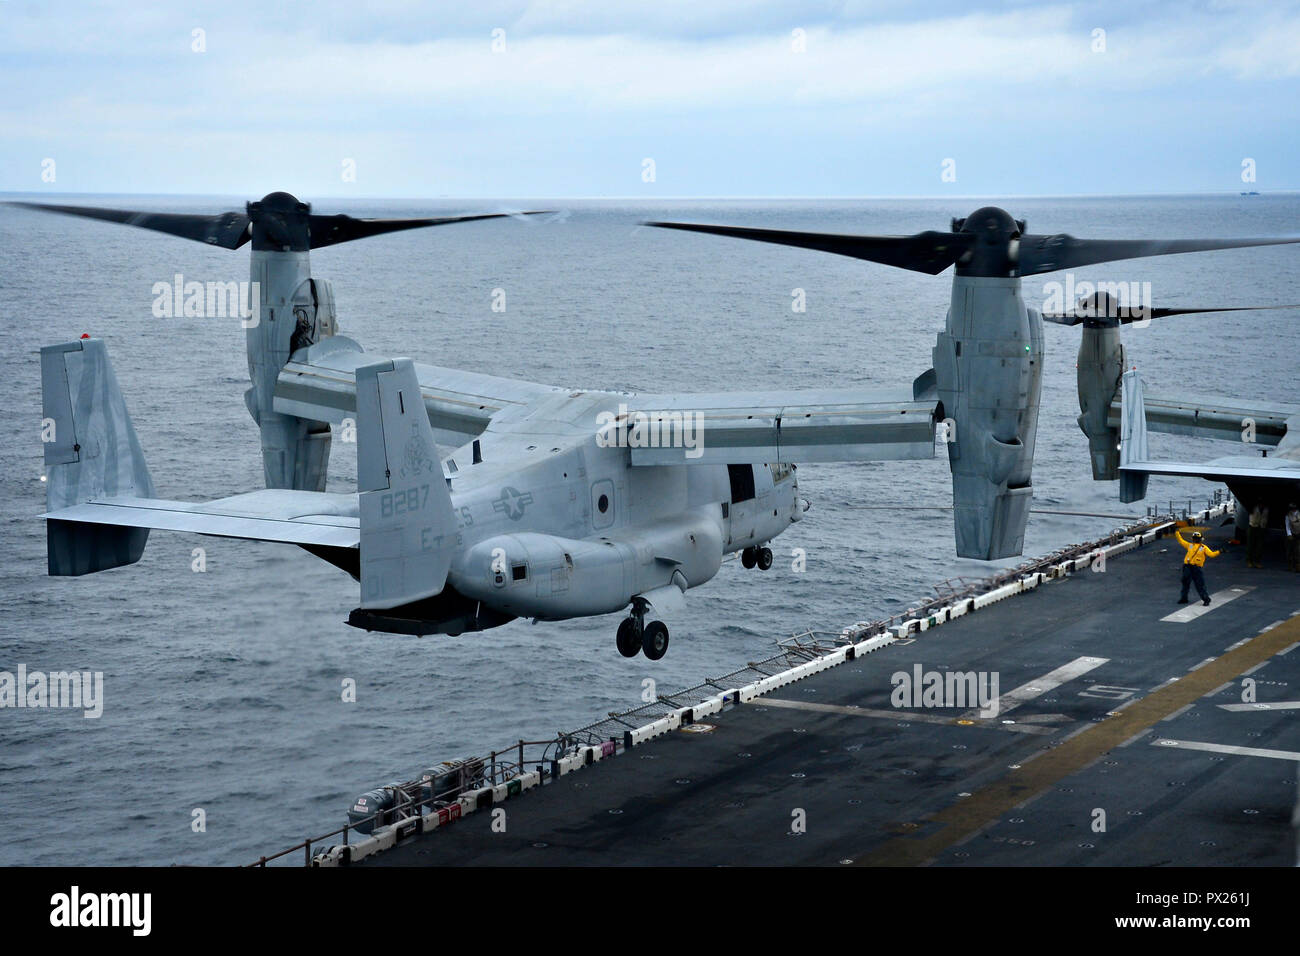 EAST CHINA SEA (Oct. 16, 2018) A Sailor directs an MV-22 Osprey ...